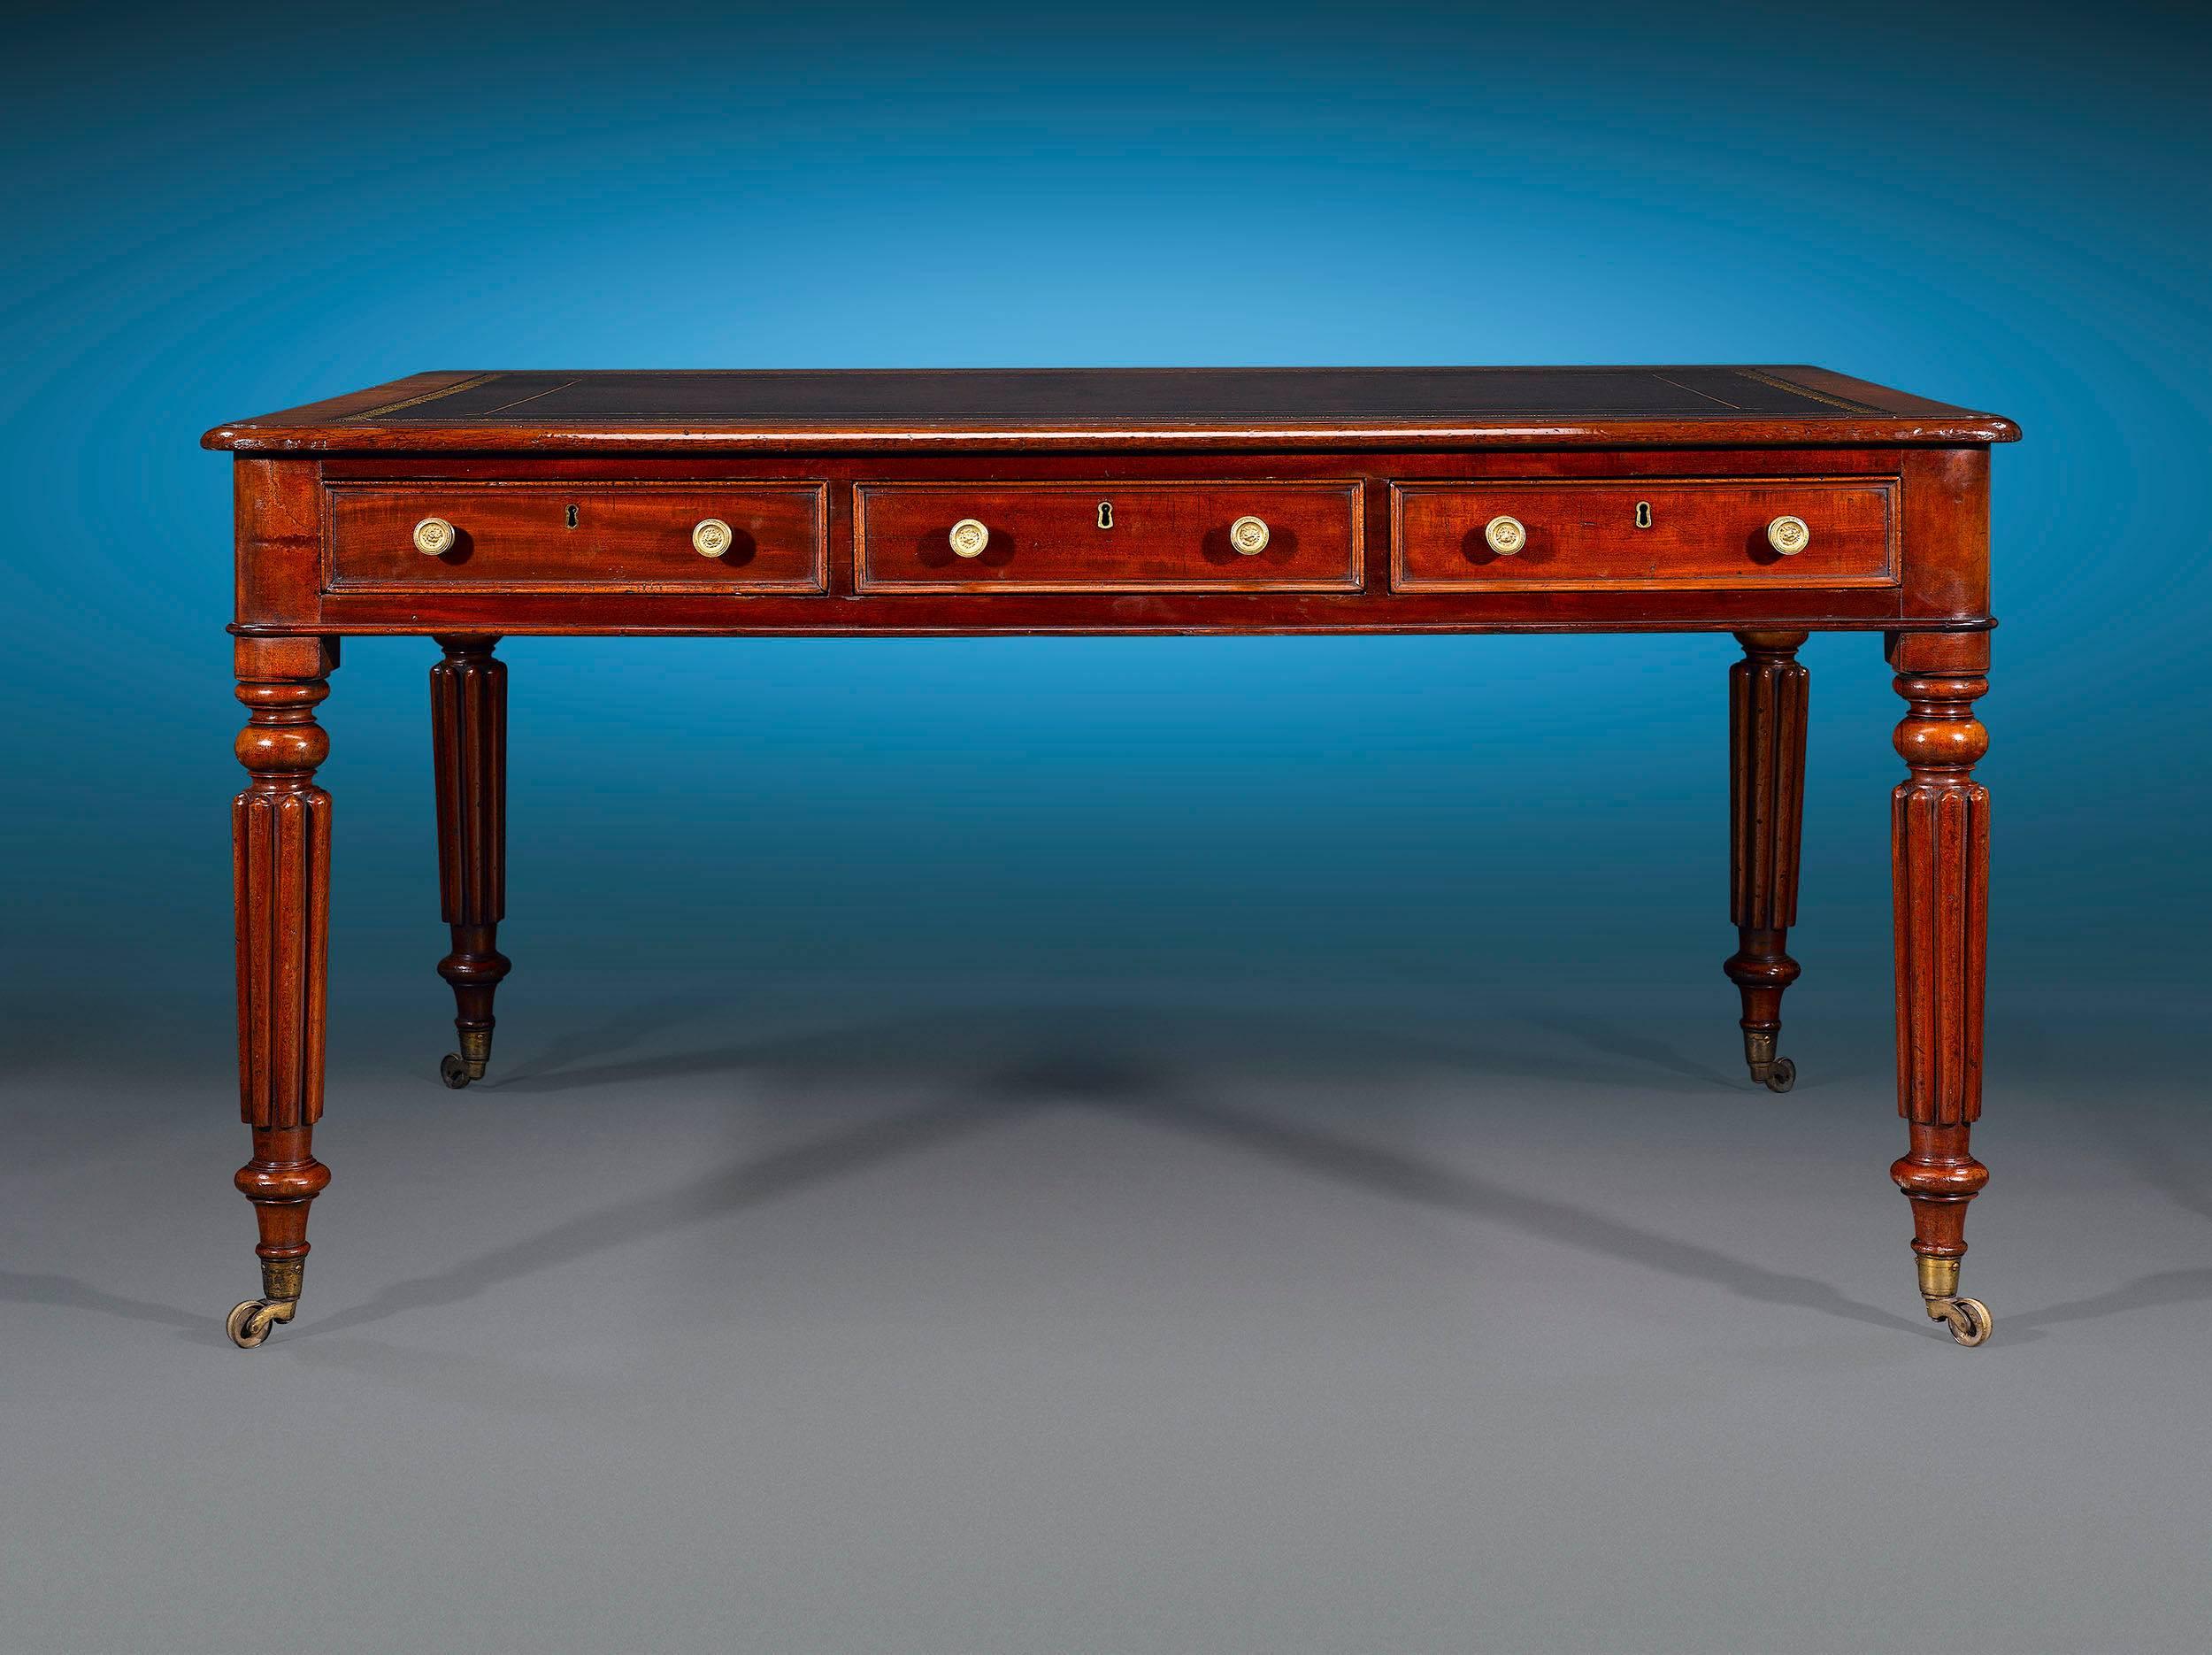 This timeless and rare William IV partner's writing table is the essence of English neoclassical furniture design. Crafted of luxurious Cuban mahogany, this elegant desk features an inset leather top, three drawers in the frieze for storage, and